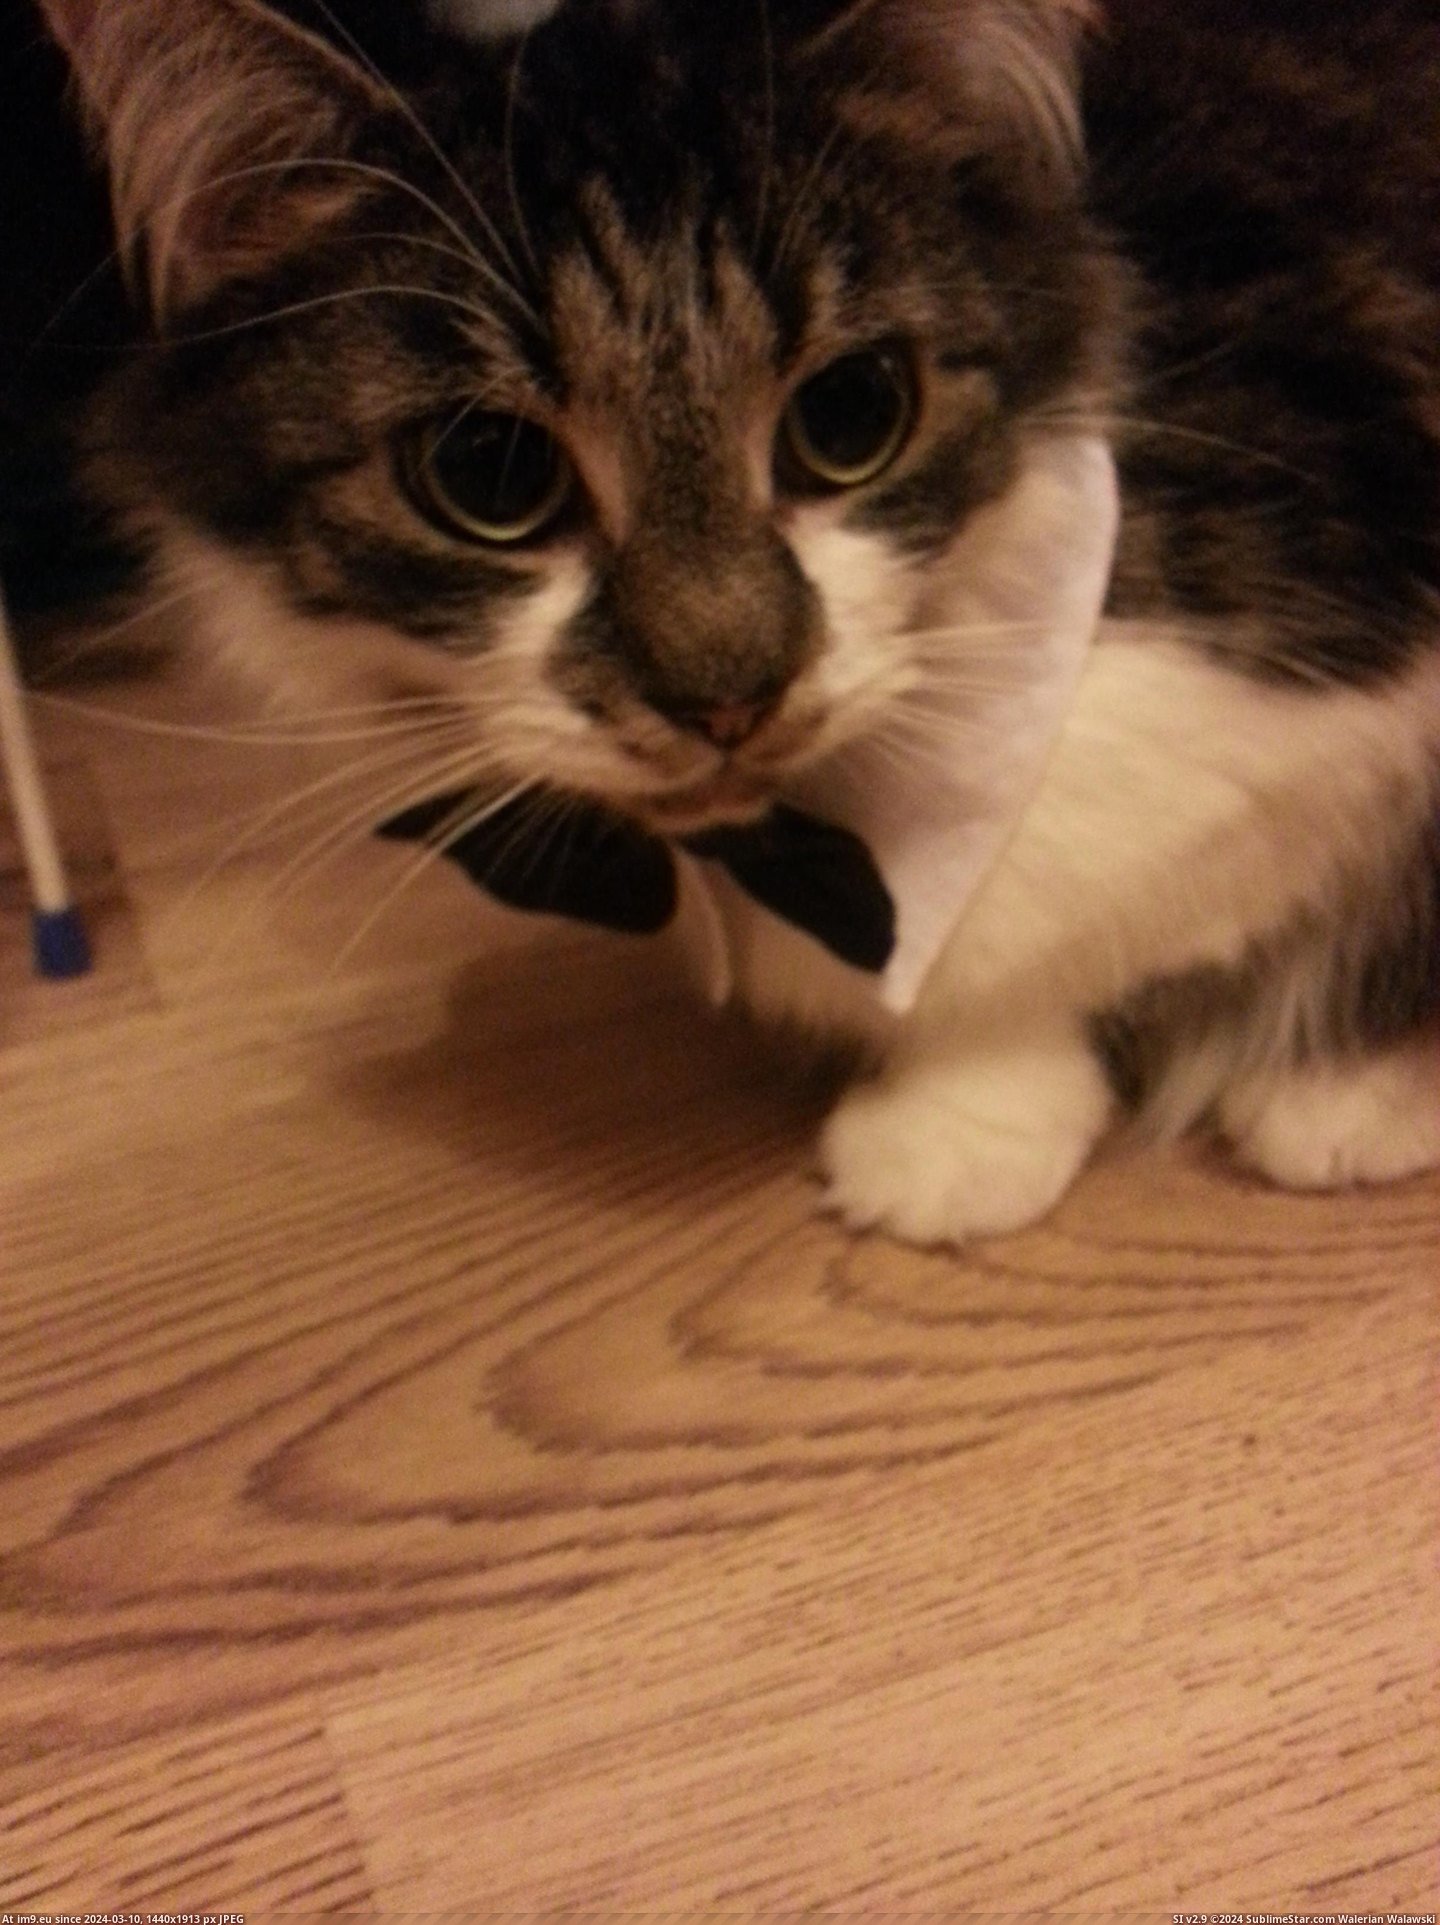 #Cats #For #Dapper #Christmas #Ready [Cats] Looking dapper ready for Christmas Pic. (Bild von album My r/CATS favs))